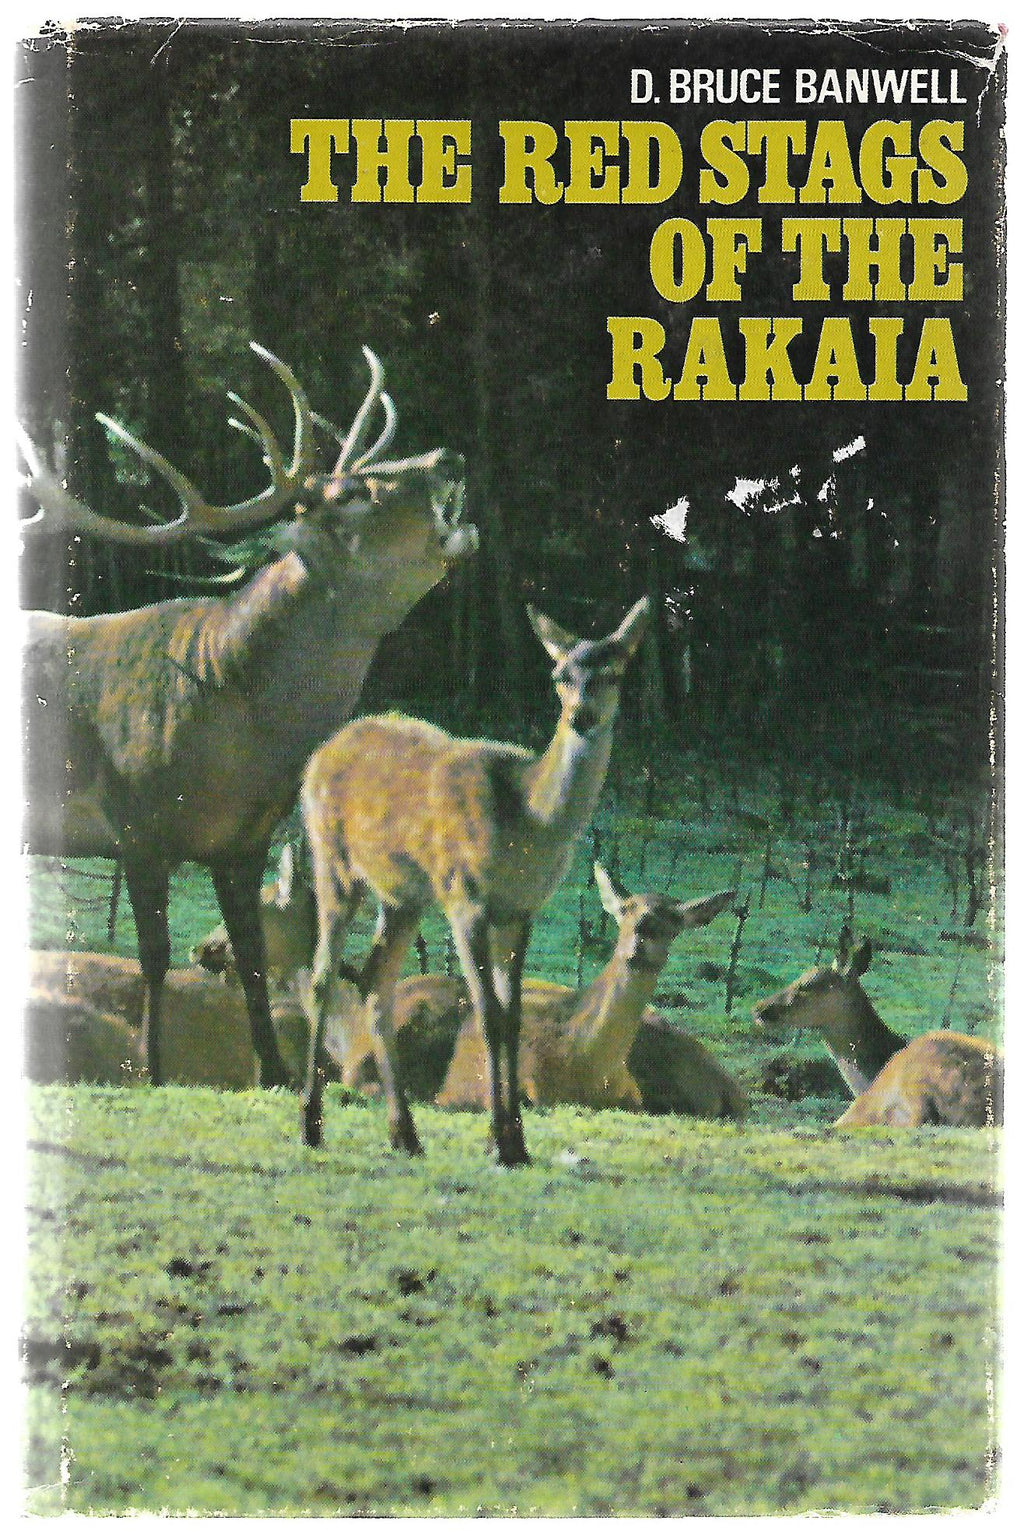 The Red Stags of the Rakaia - by D. Bruce Banwell. [First Edition]